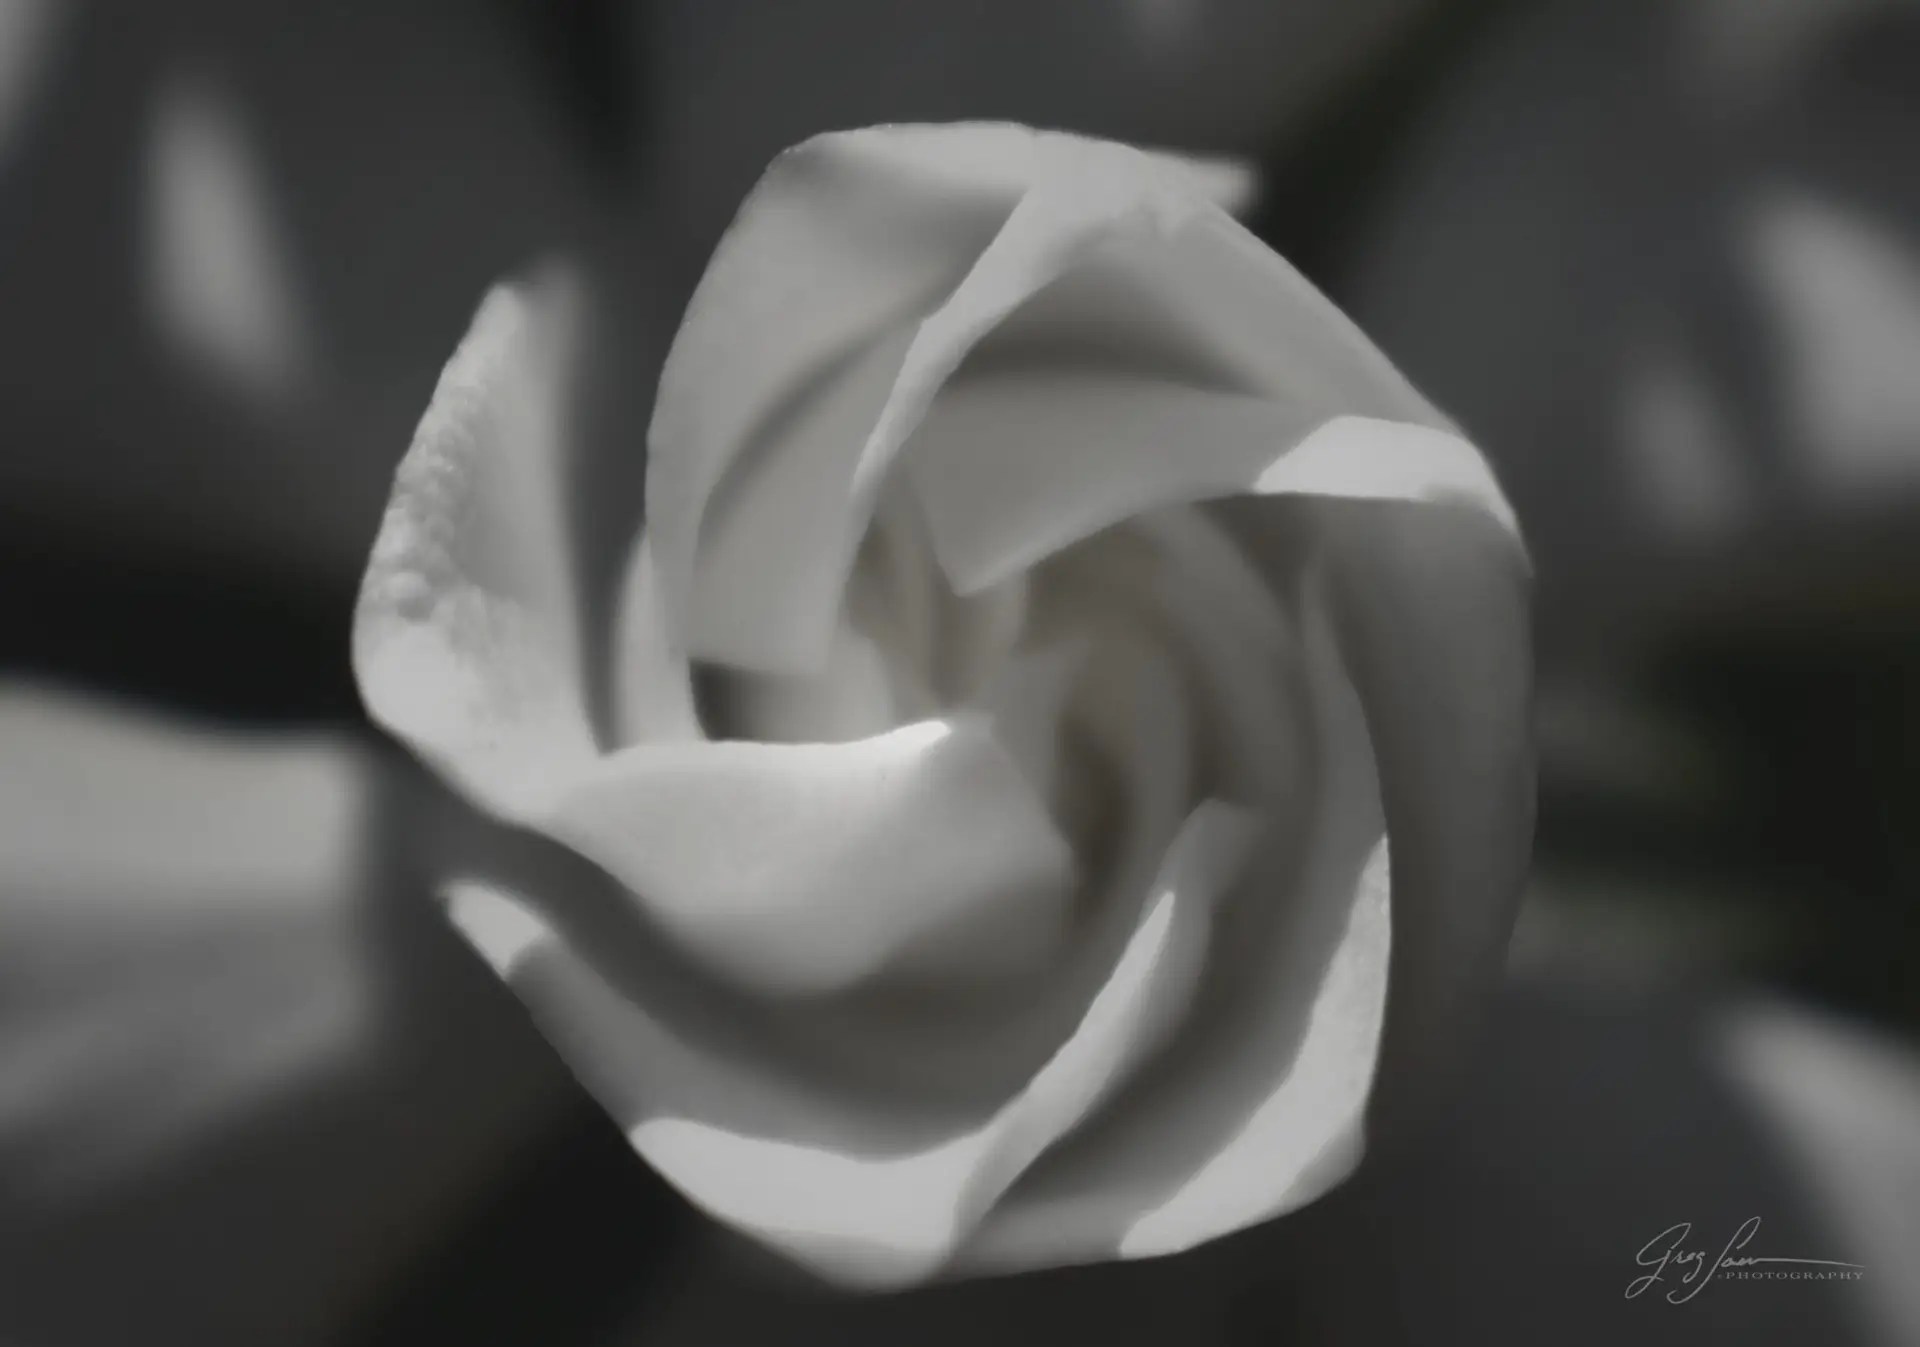 An image of a single soft white Gardenia flower in bloom.